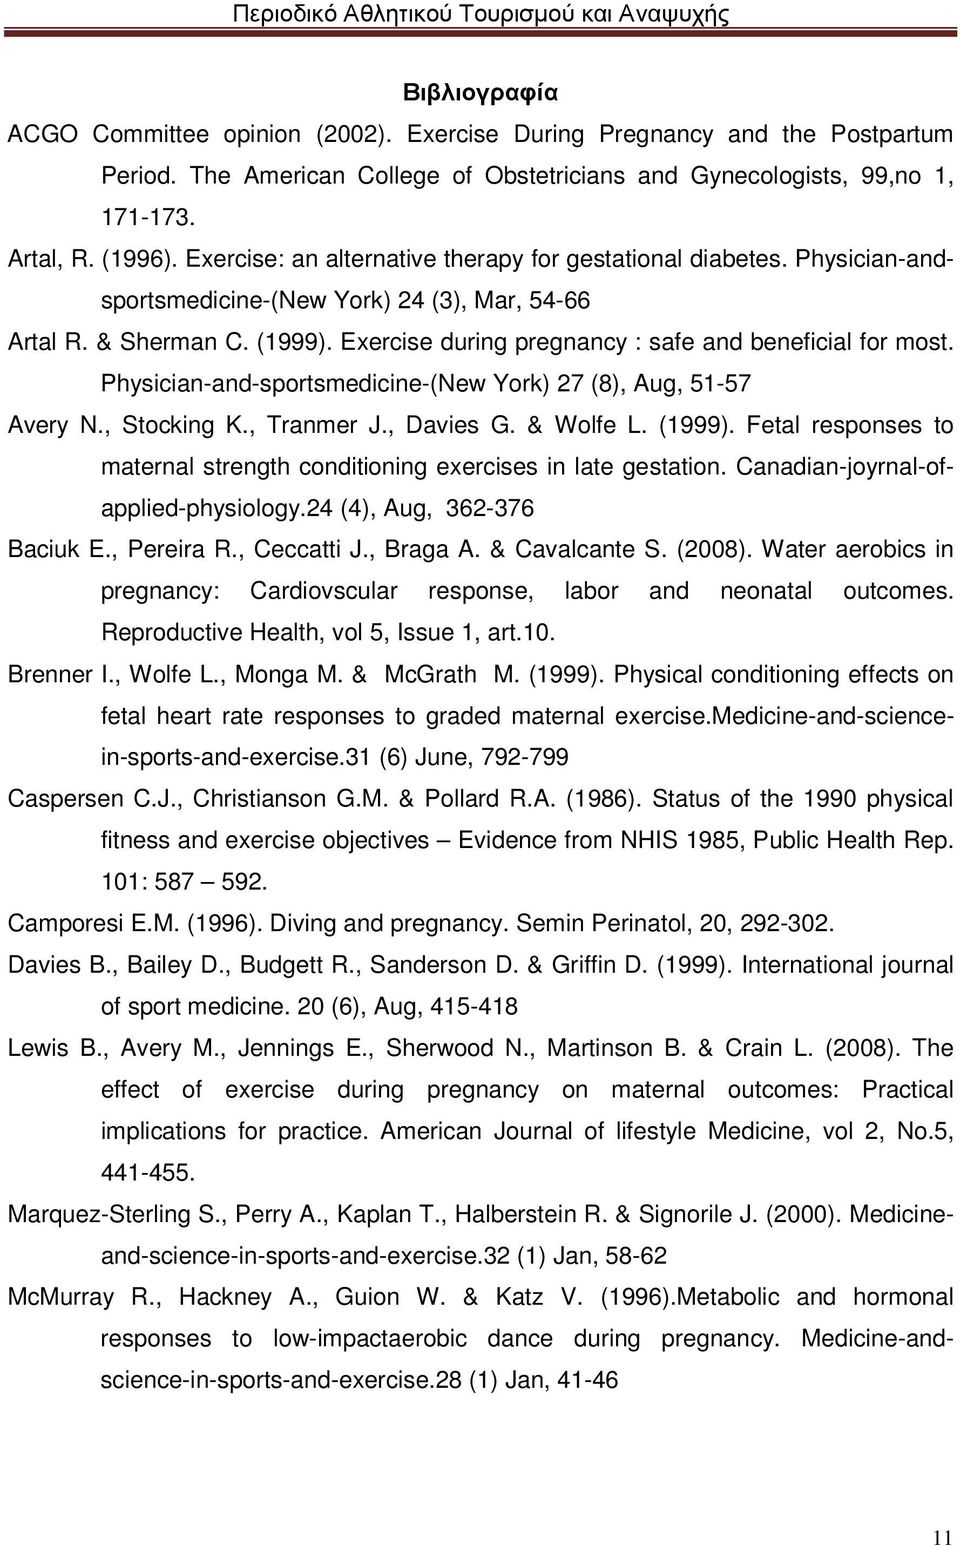 Exercise during pregnancy : safe and beneficial for most. Physician-and-sportsmedicine-(New York) 27 (8), Aug, 51-57 Avery N., Stocking K., Tranmer J., Davies G. & Wolfe L. (1999).